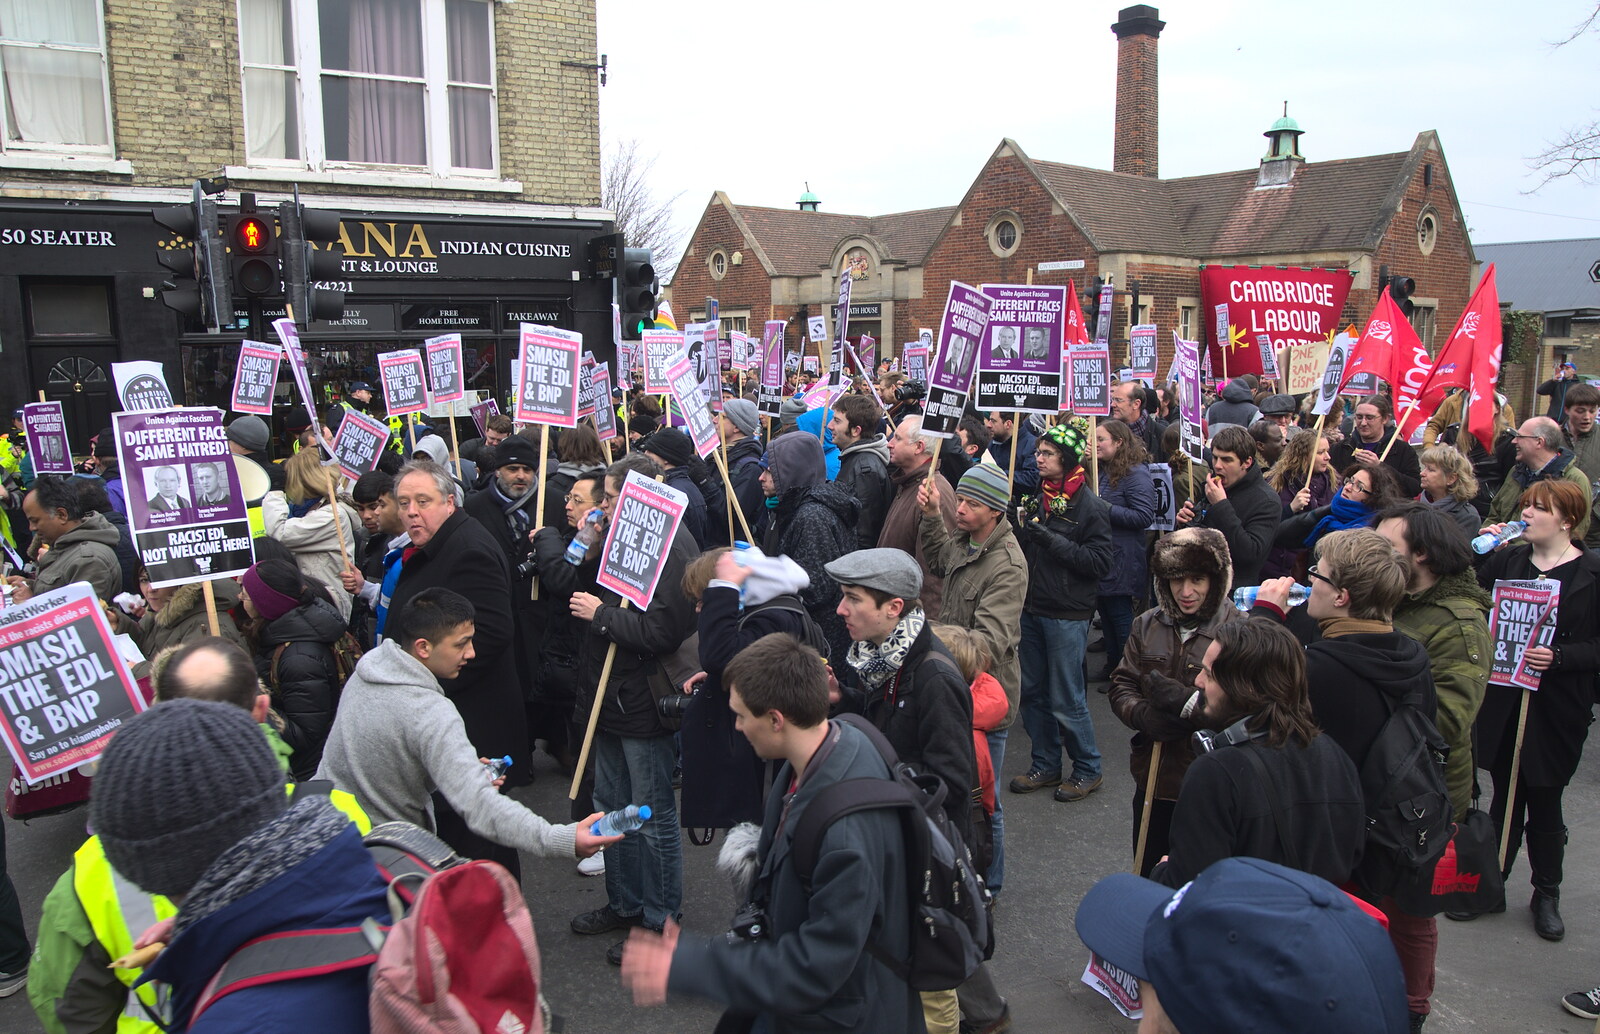 Massed placards, as water is handed out from An Anti-Fascist March, Mill Road, Cambridge - 23rd February 2013